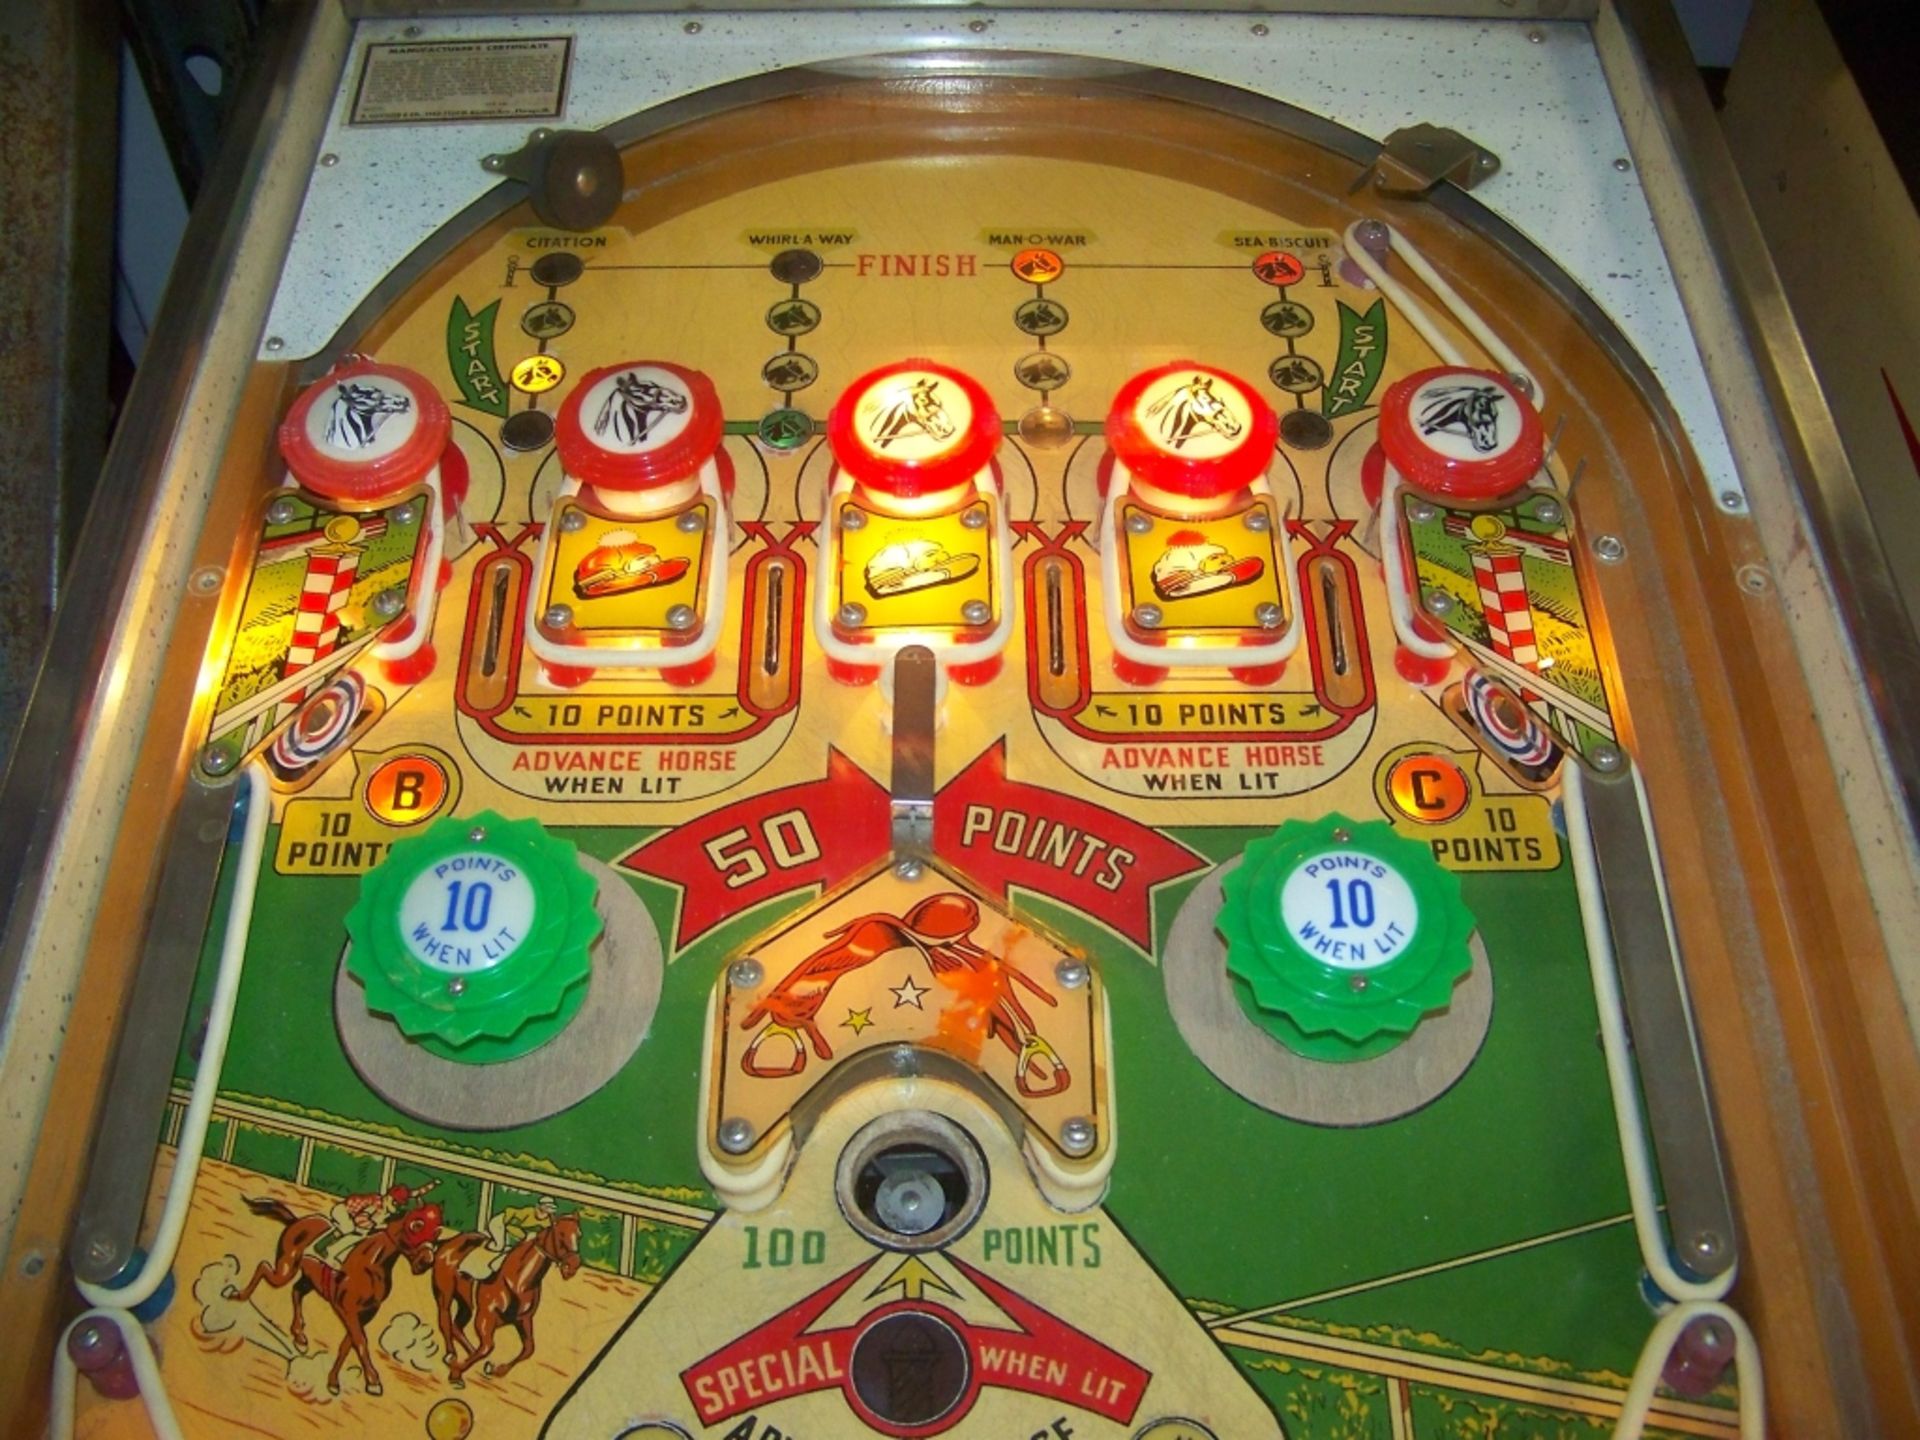 FOTO FINISH PINBALL MACHINE GOTTLIEB 1961 Item is in used condition. Evidence of wear and commercial - Image 7 of 7